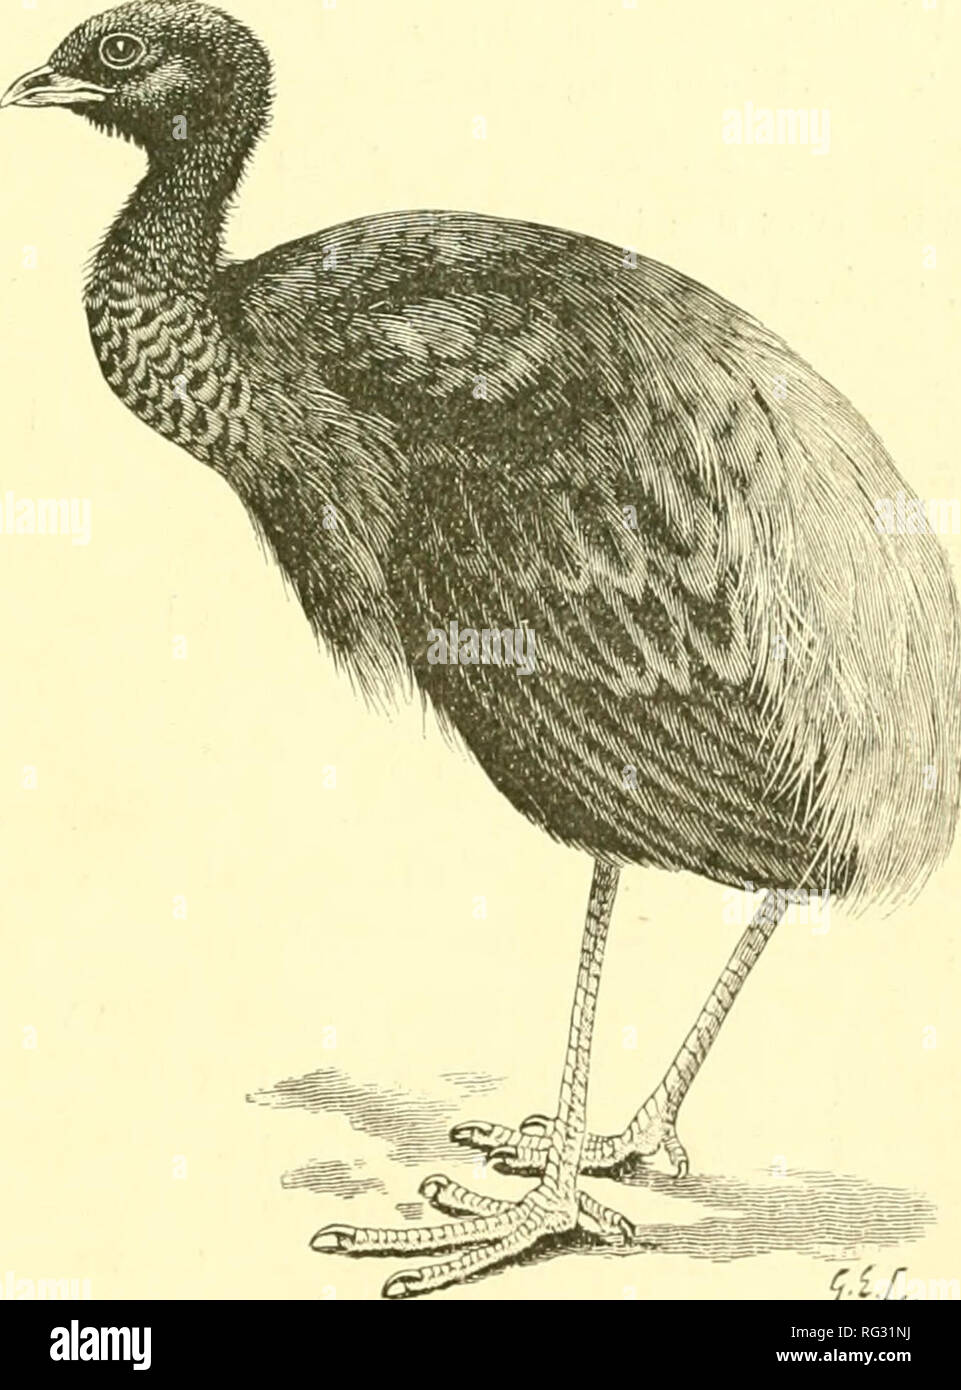 . The Cambridge natural history. Zoology. PSOPHIIDAE 257 with white flecks; the upper parts are glossed with brouzy- purple, the bill is greenish. A. scolopaceus, the Carau, Courlan, Lamenting Bird, or Crazy &quot;Widow, ranging from Guiana to Argen- tina, has only the head and neck streaked. Generally solitary or found in family-parties, these birds conceal themselves by day among reeds or damp forest-vegetation; they rise with difticulty after a preliminary run, and take low, brief flights, the legs hanging down and the wings flapping slowly, while the latter are elevated for a descent. They Stock Photo